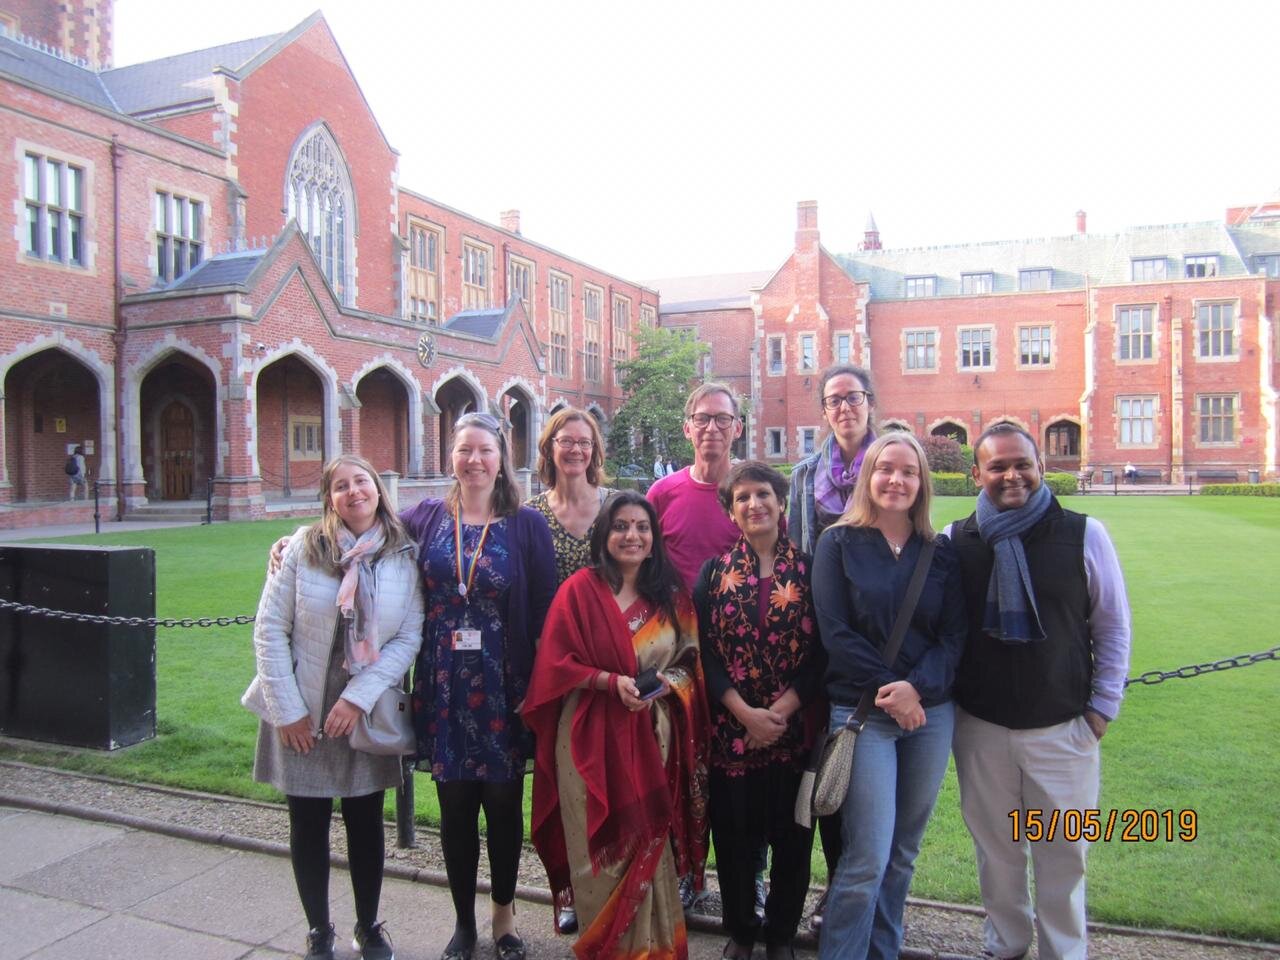  CWIT Secretary Shreela Ghosh attending the annual India lecture (2019), organised by the School of History, Anthropology, Philosophy and Politics, Queen's University, Belfast UK 